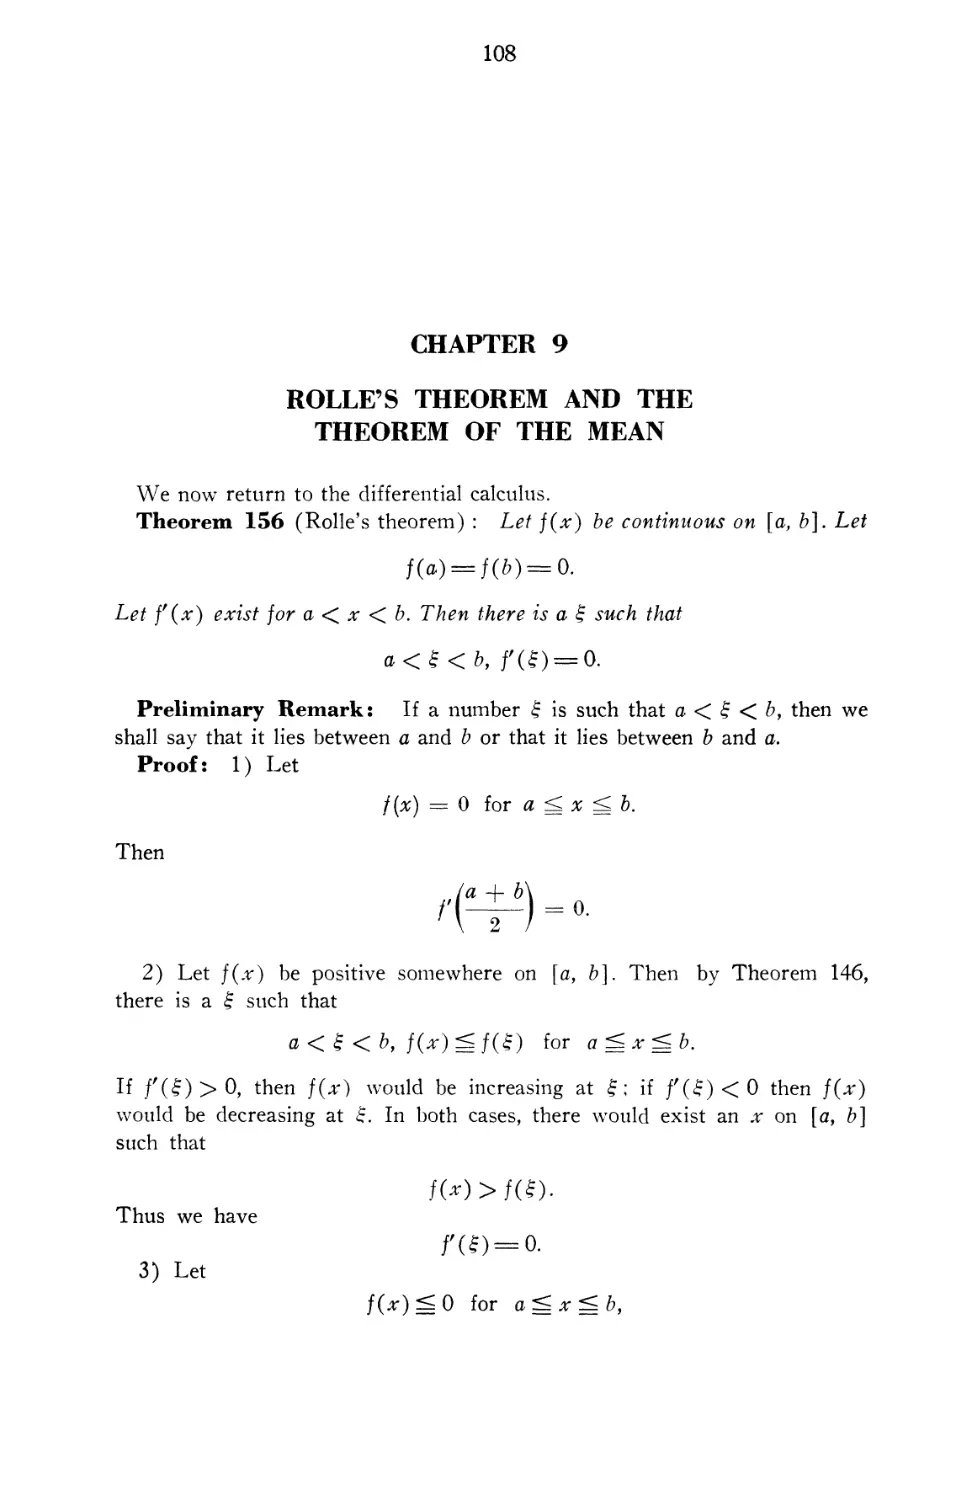 Chapter 9 Rolle's Theorem and the Theorem of the Mean